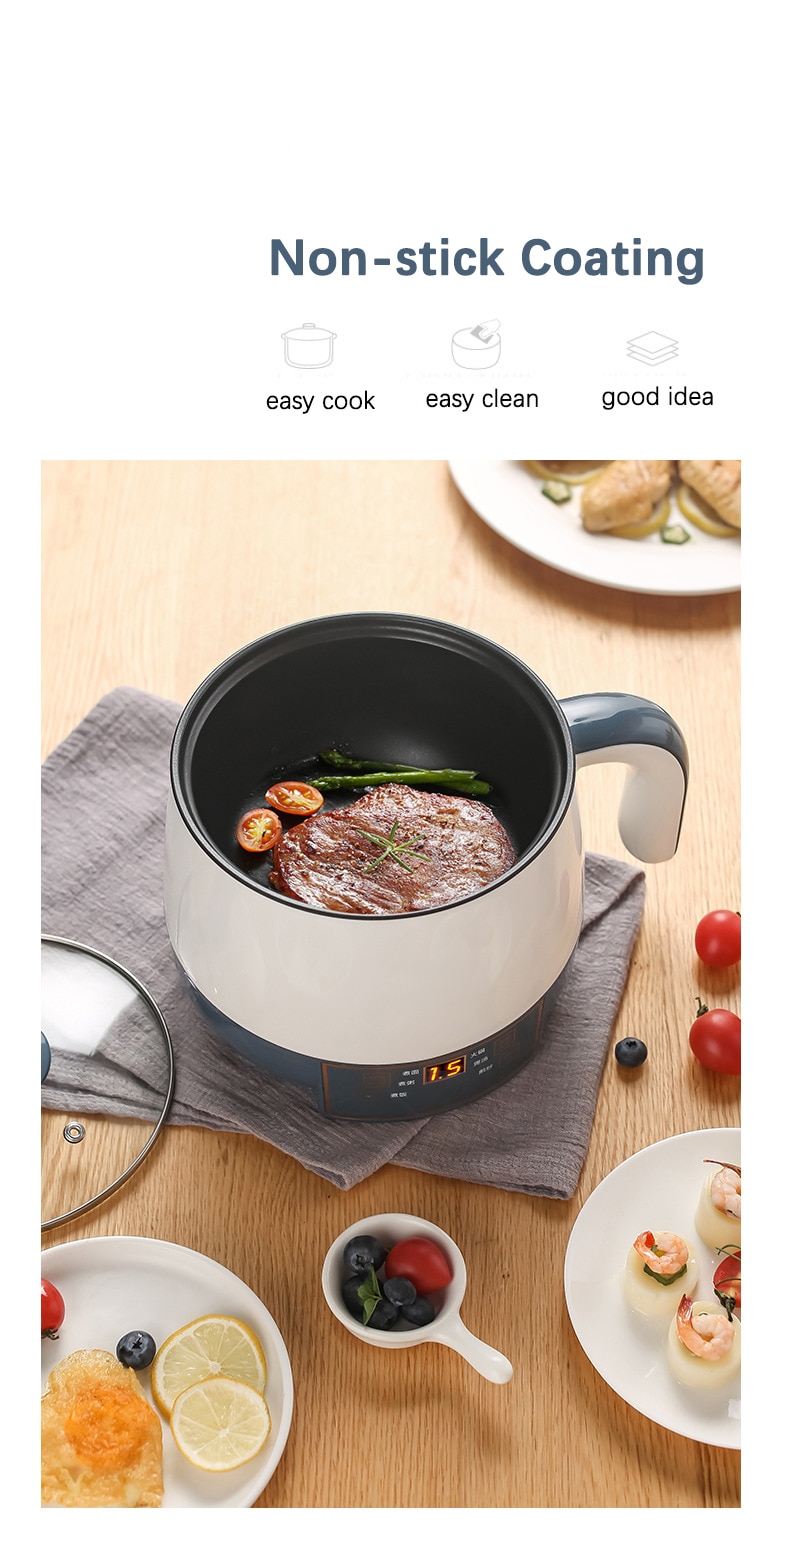 Electric Rice Cooker Household 220V Hot Pot cooker For Students Dormitory  Multi-functional Electric Cooking Machine Nonstick Pan